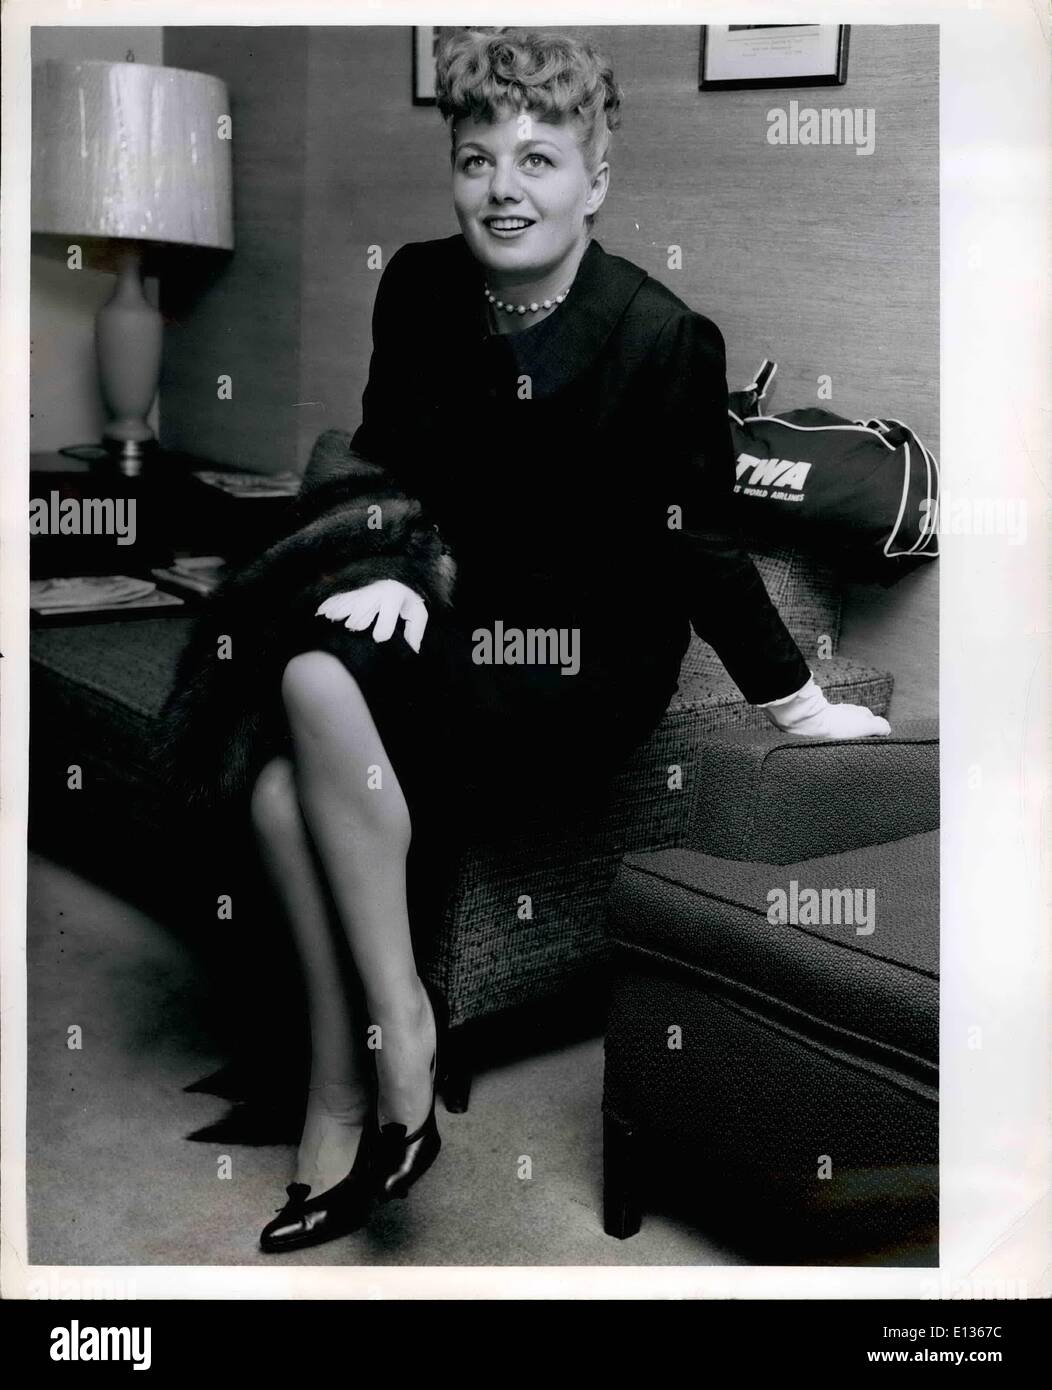 Feb. 28, 2012 - Star Shelley Winters , who lost the 40 pounds he had to gain for her Matronly role in ''The Diary of Anne Frank'', Is shon prior to boarding at a Jet stream to Rome . Italy. Where she ''ILL Join her Actor Husband Anthony Franciosa. During her Month long visit Abroad she ''ILL Repreent the United States and the Film Industry at the venice film Festival. Stock Photo